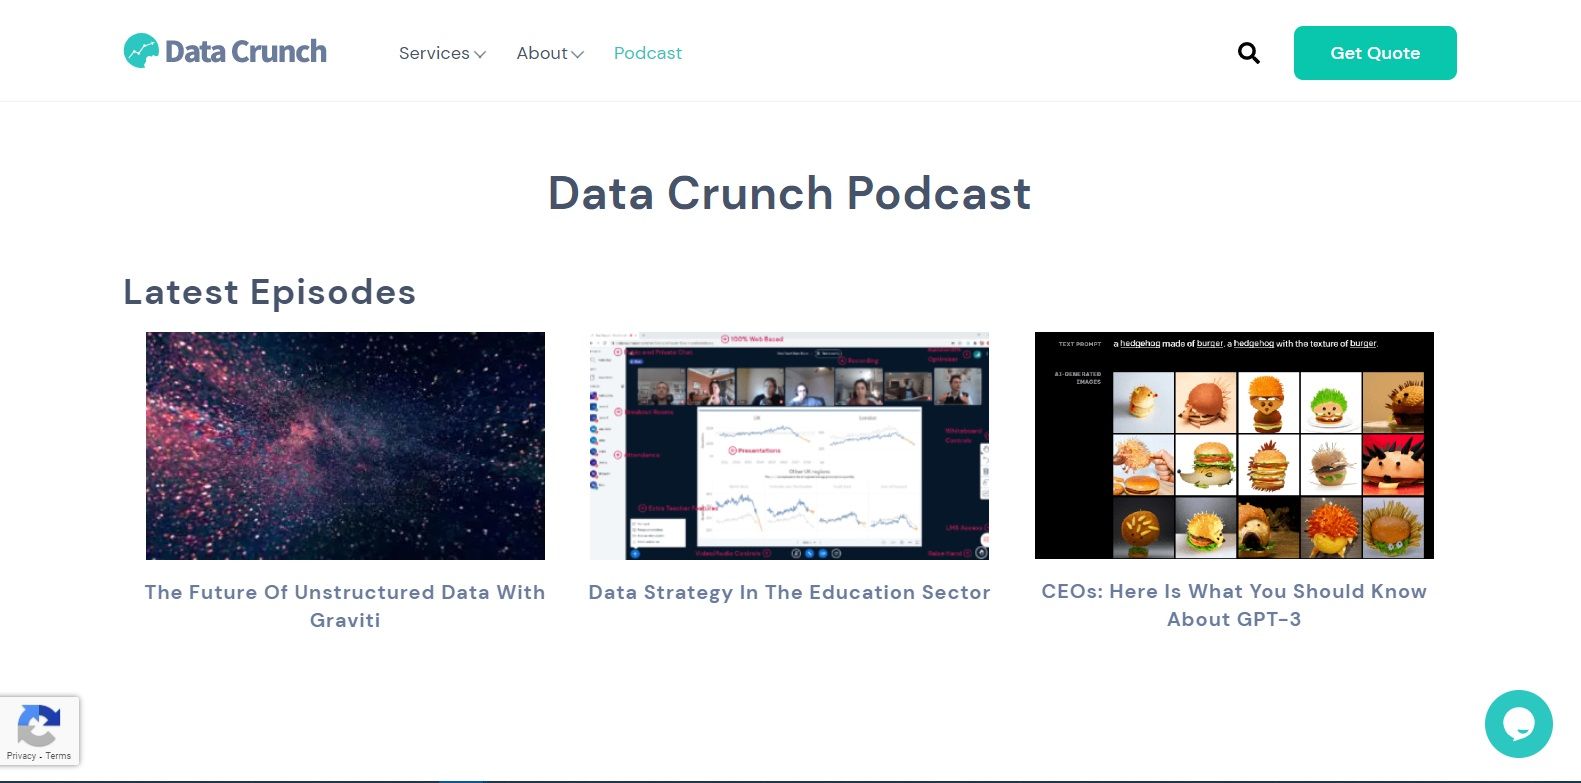 A screenshot of the Data Crunch podcast overview